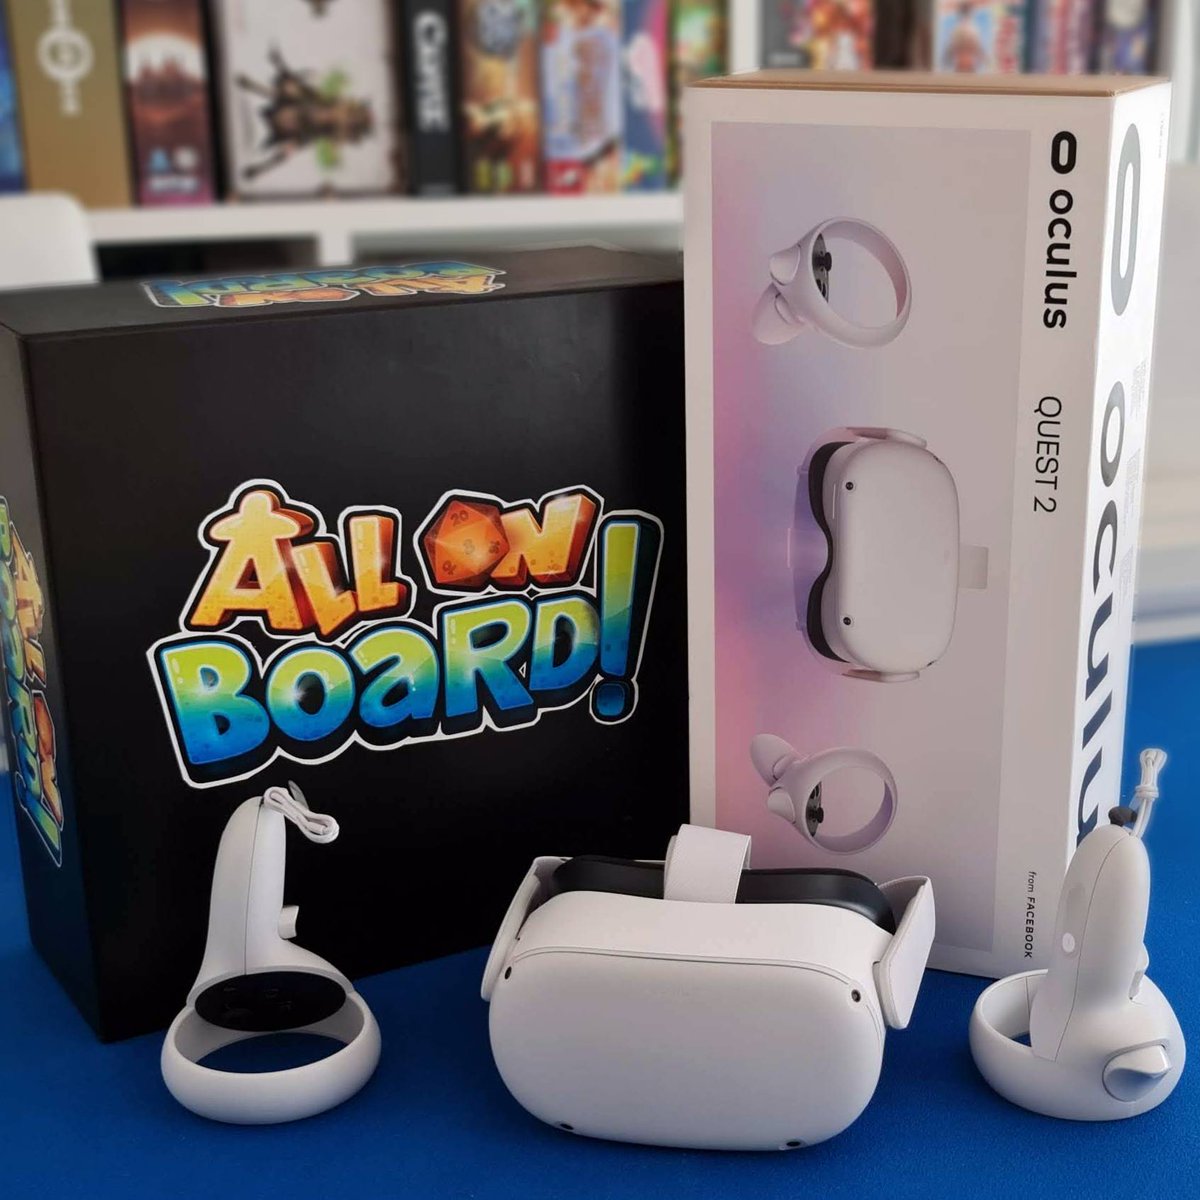 🚨Attention all @BlasphemousGame and #thelastdoor fans on Twitter! We're giving away🎁3x Meta Quest 2 headsets to celebrate our newest project, @AllOnBoardVR (currently on #kickstarter). Here's how to participate🏆gleam.io/O3SOs/meta-que…